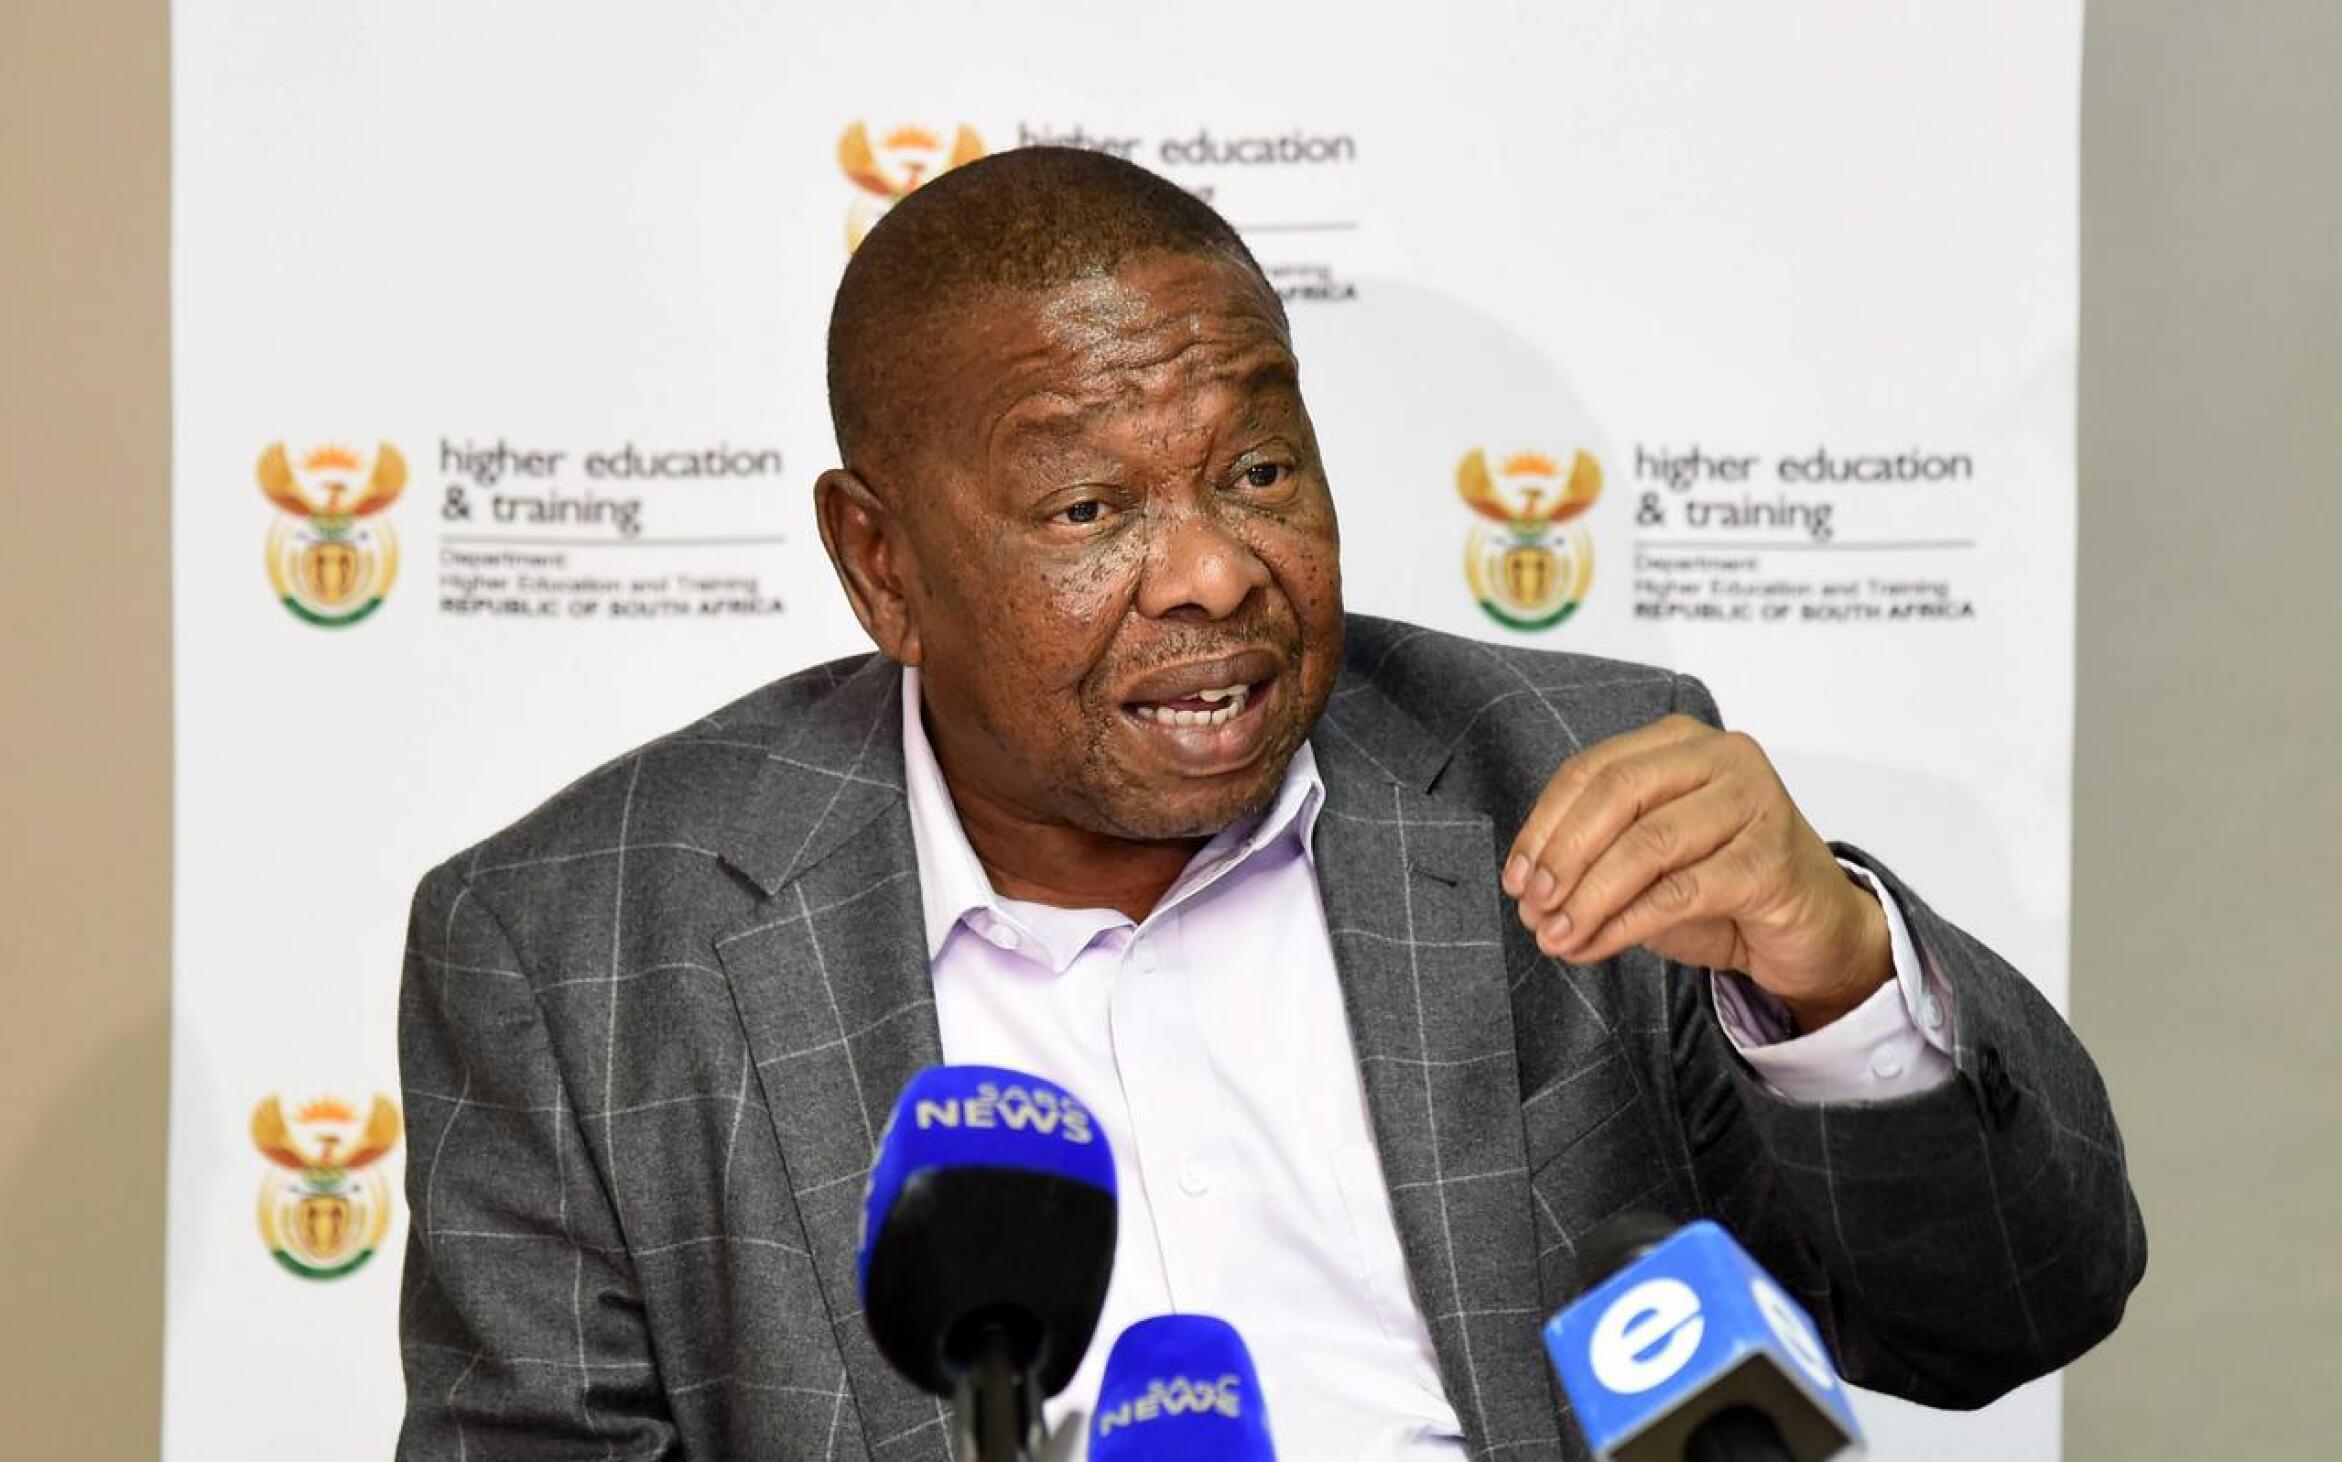 Minister Blade Nzimande appoints an assessor to investigate allegations of mismanagement at MUT while the tertiary institutions vice-chancellor remains suspended.